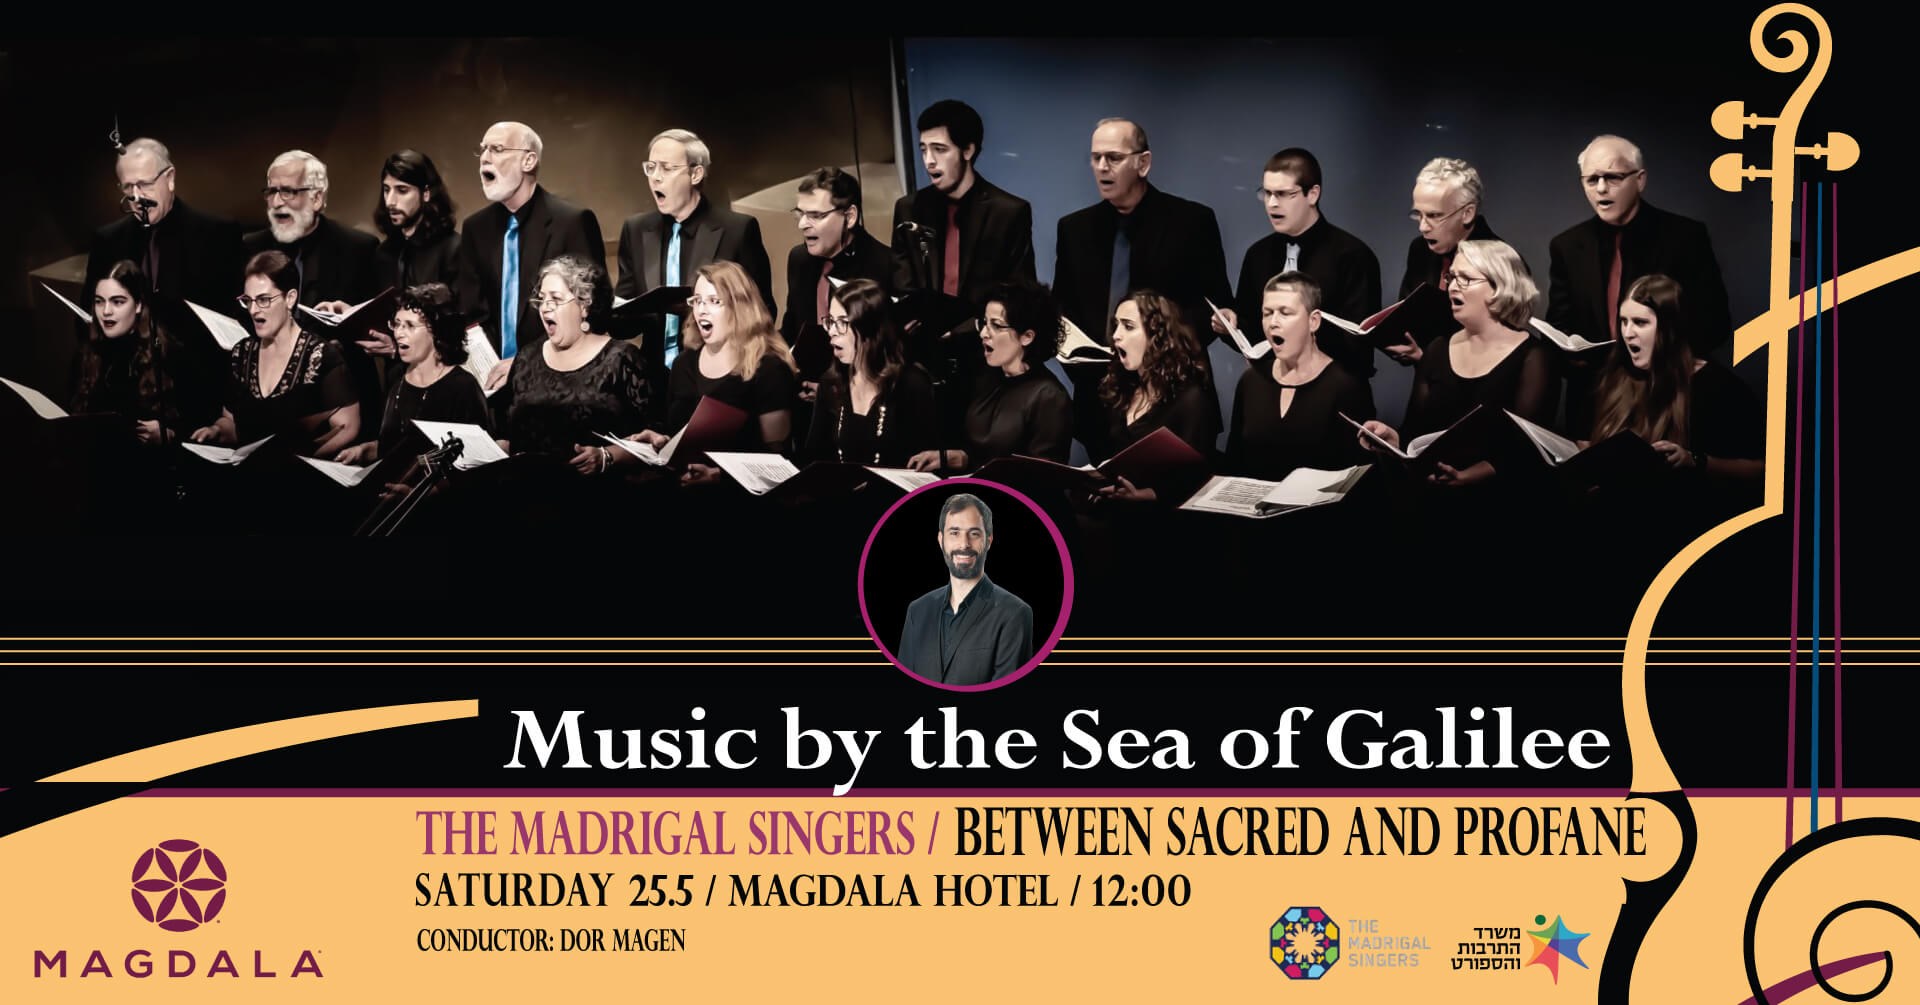 Sea of Galilee Concerts - Between Sacred and Profa